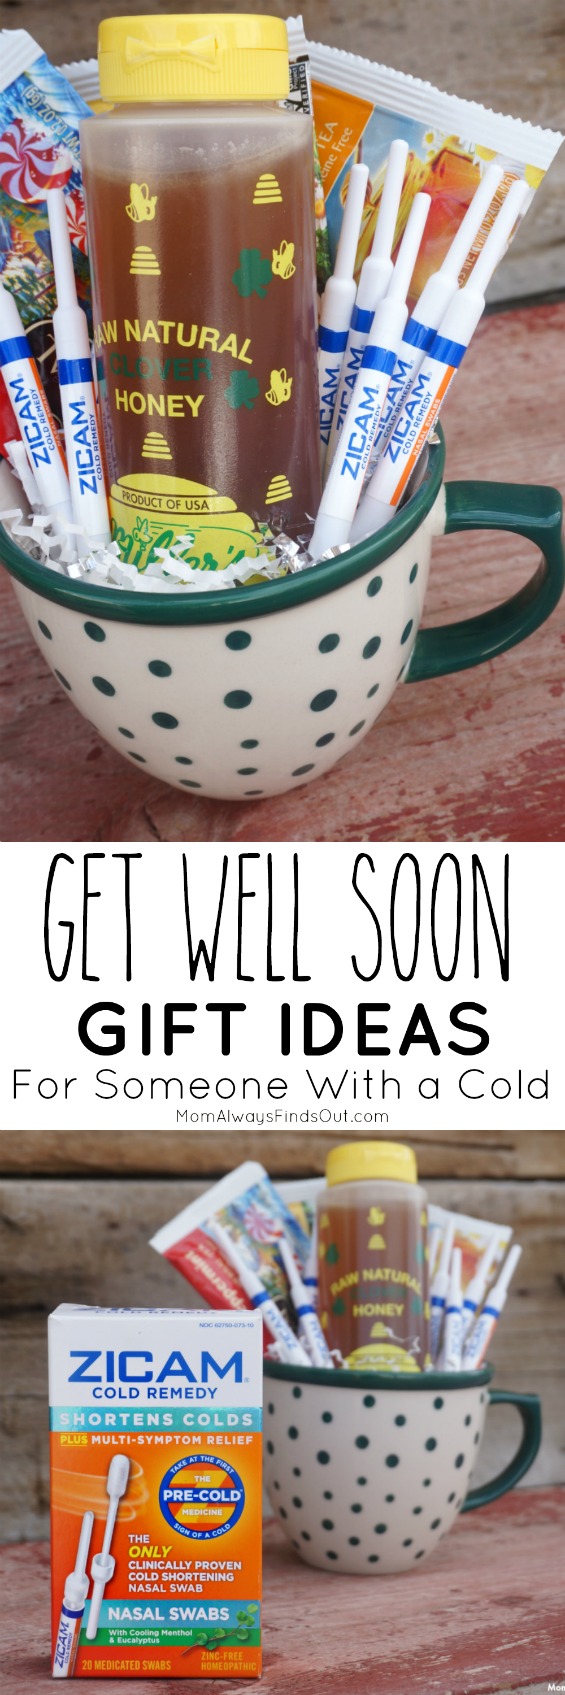 Get Well Soon Gifts For a Cold with Zicam Cold Remedy #ZicamCrowd